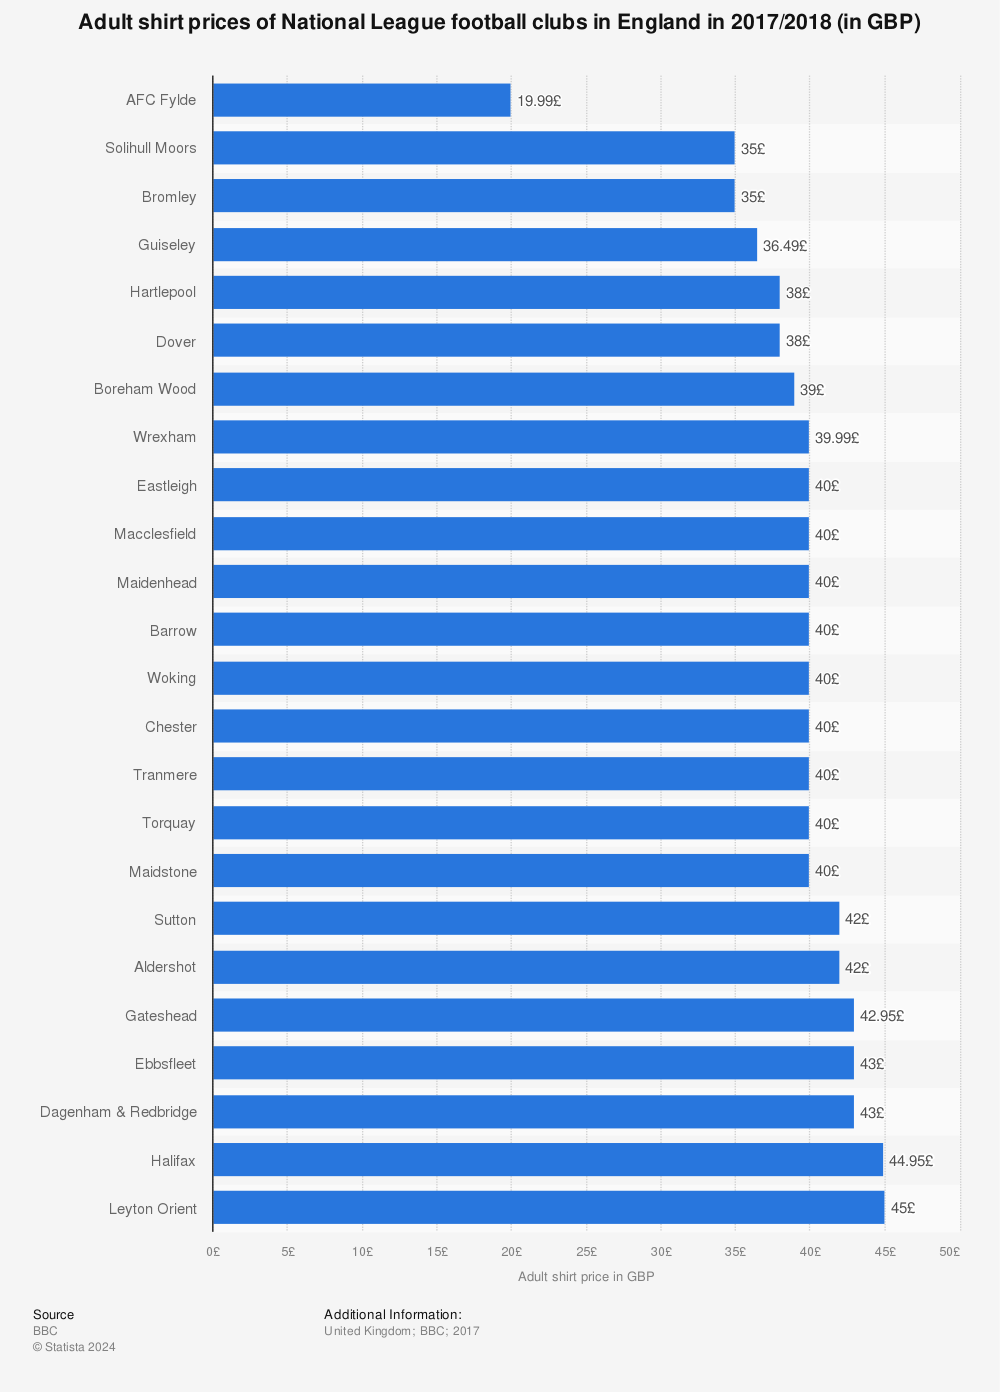 Statistic: Adult shirt prices of National League football clubs in England in 2017/2018 (in GBP) | Statista